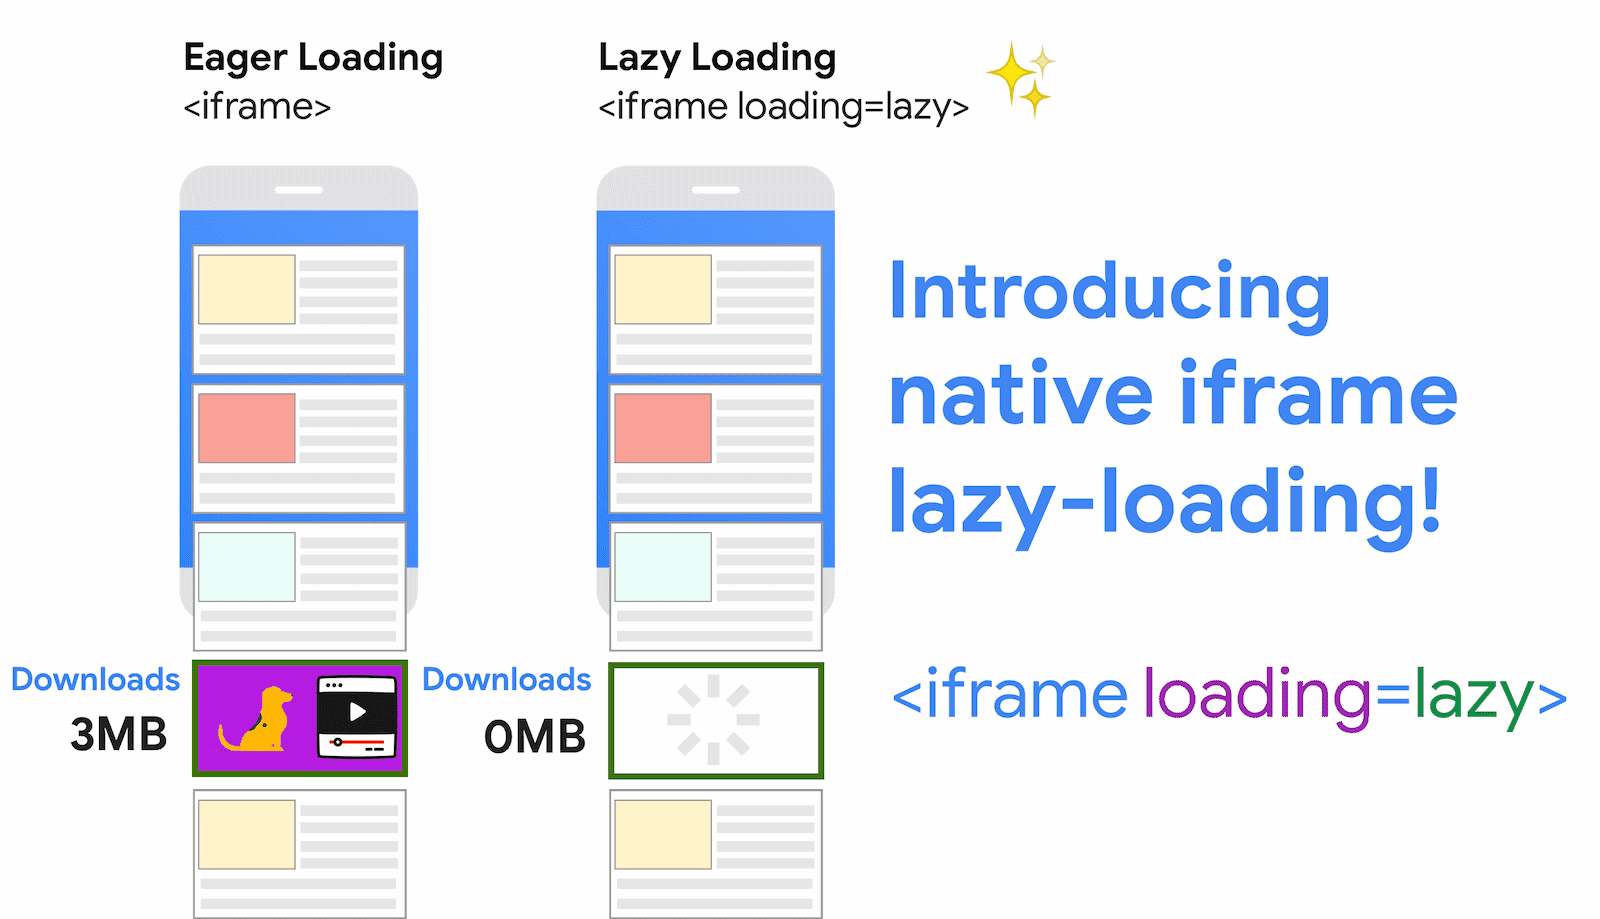 Chromium browsers support iframe lazy loading now to support performance